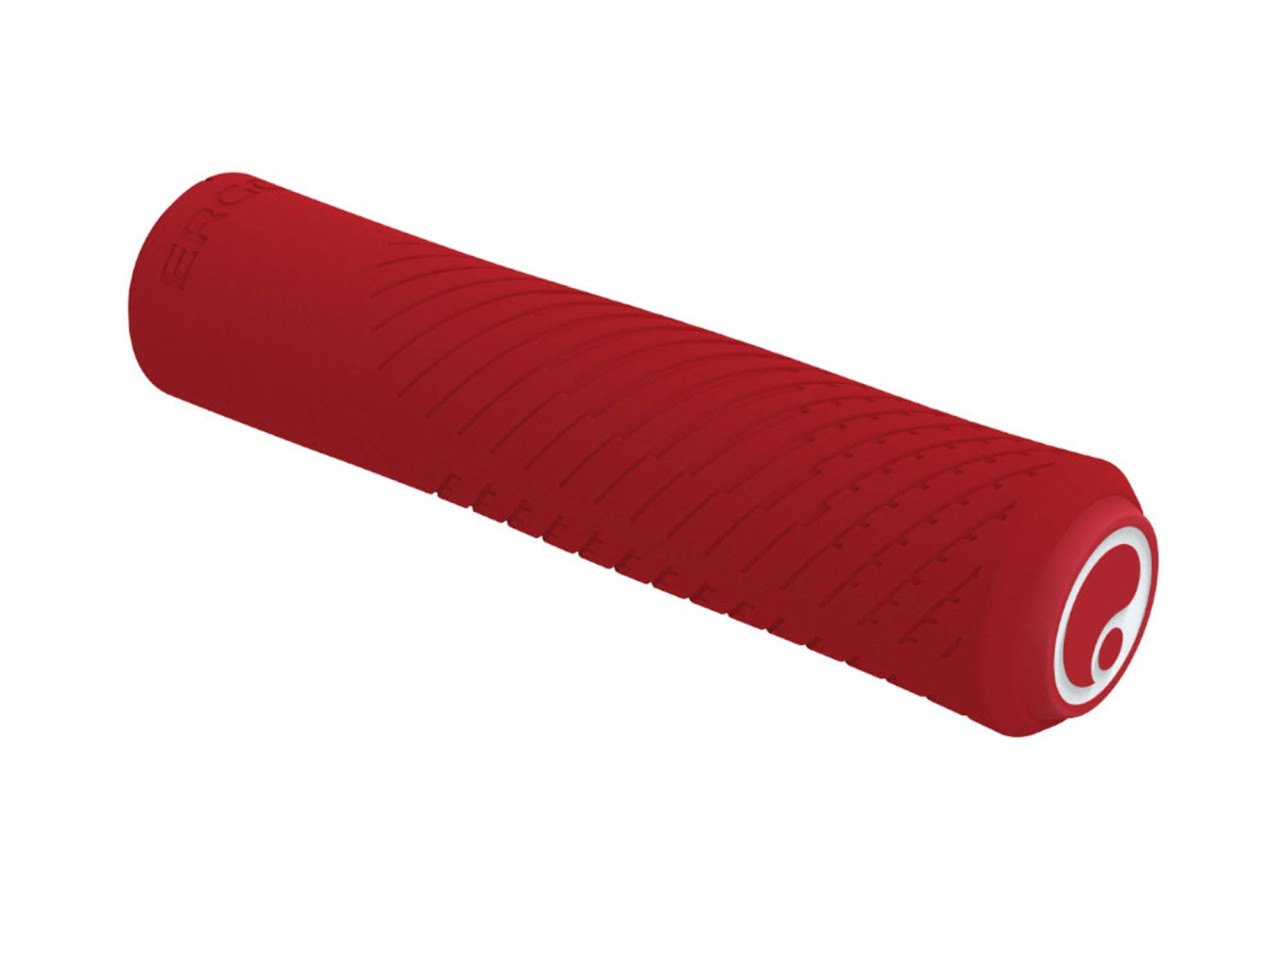 Ergon Griffe GXR large, risky red